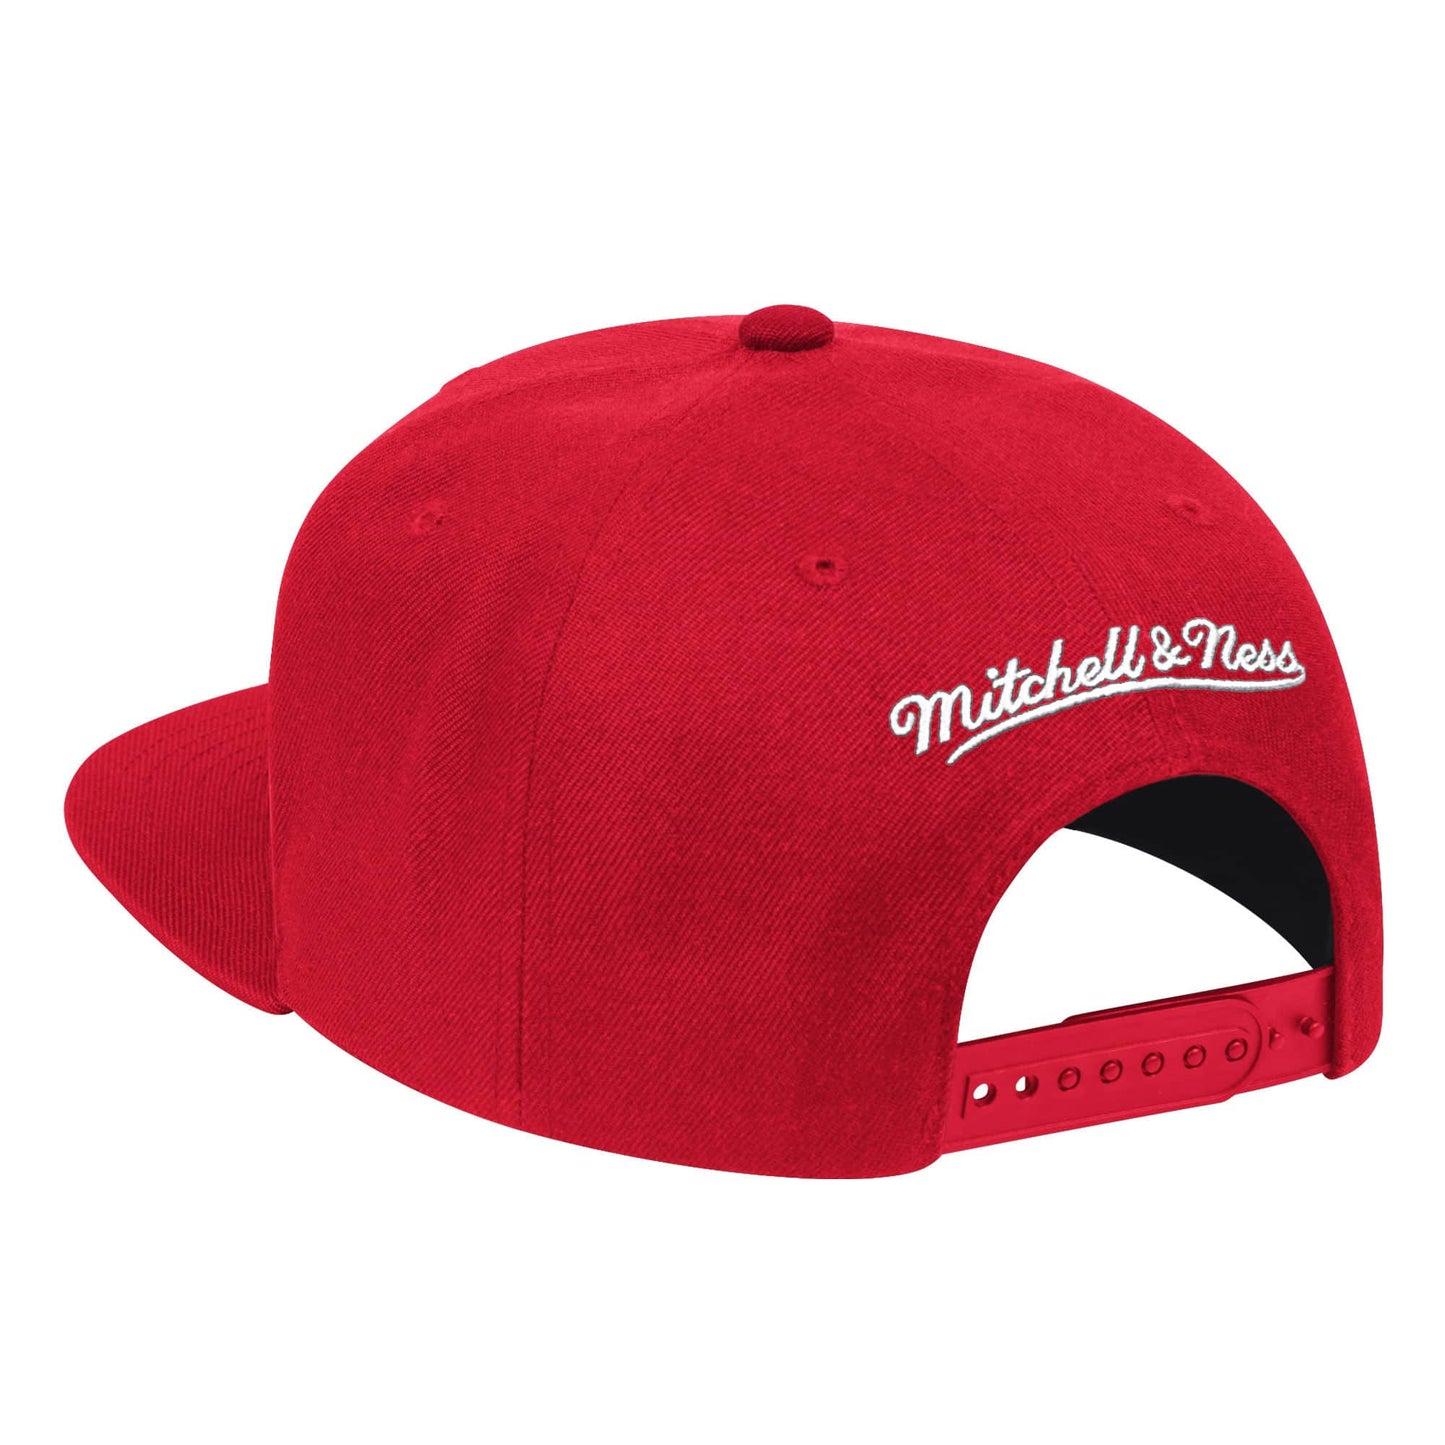 Mens NBA Chicago Bulls White Logo Team Ground Red Snapback Hat By Mitchell And Ness